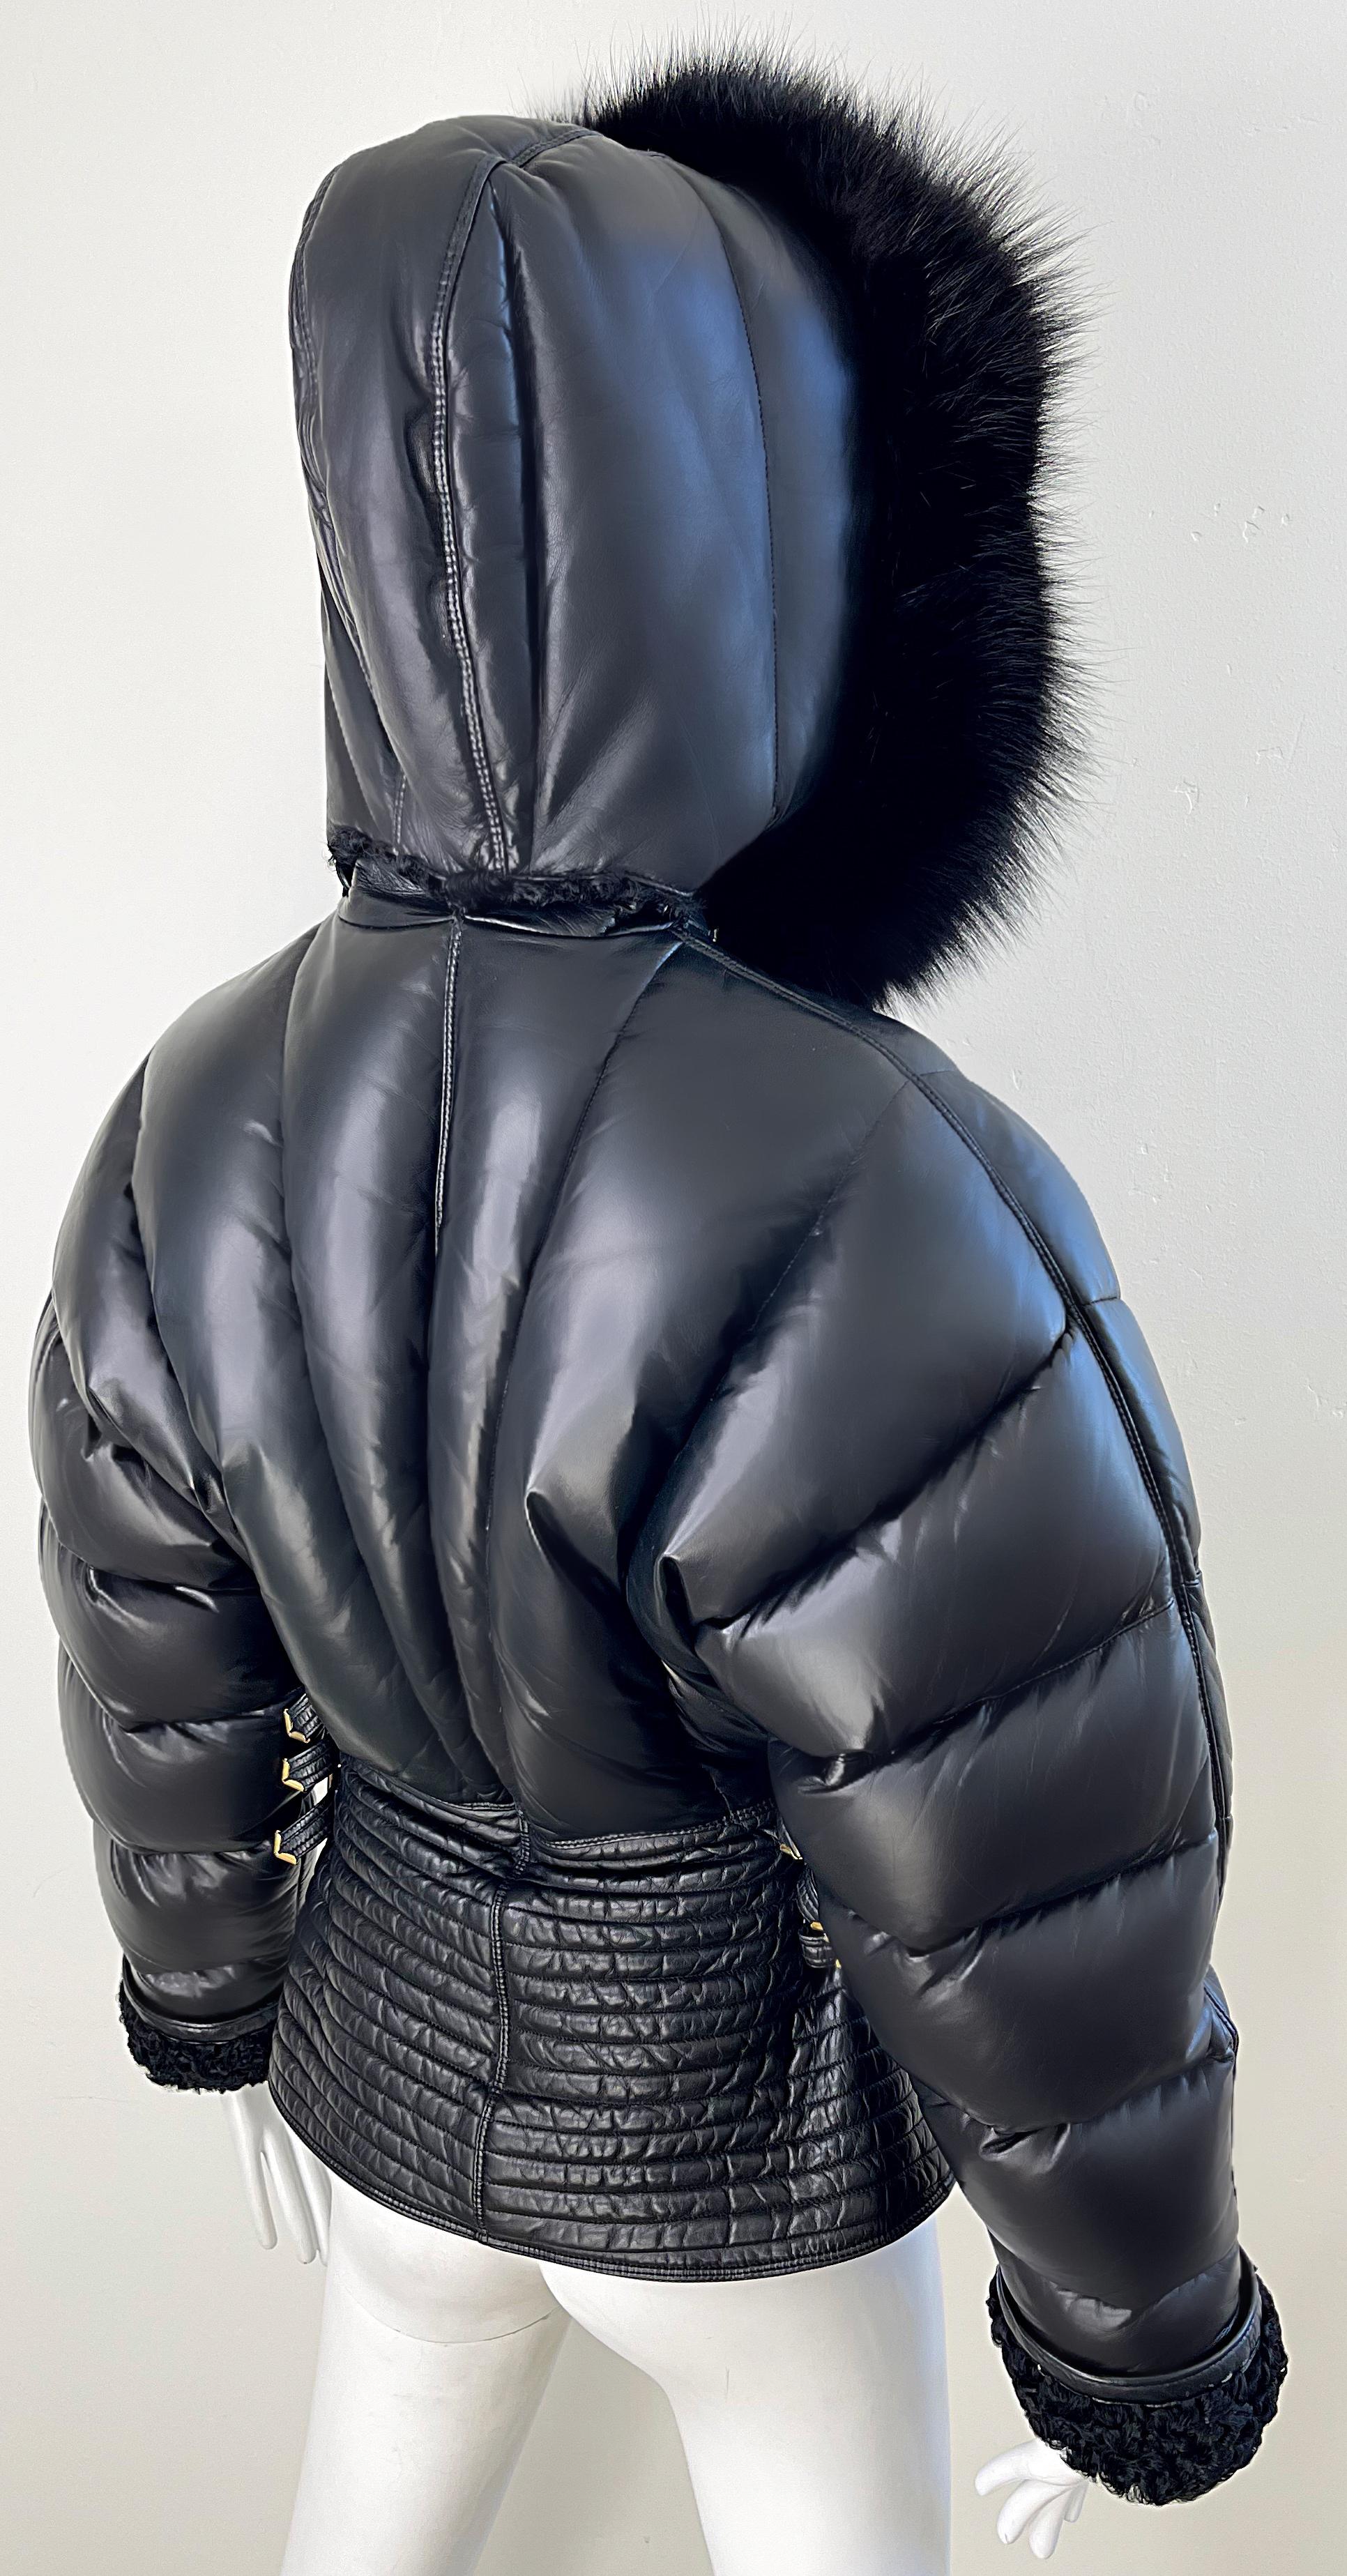 Gianni Versace Runway F/W 1992 Bondage Collection Leather Fox Astrakhan Jacket For Sale 1